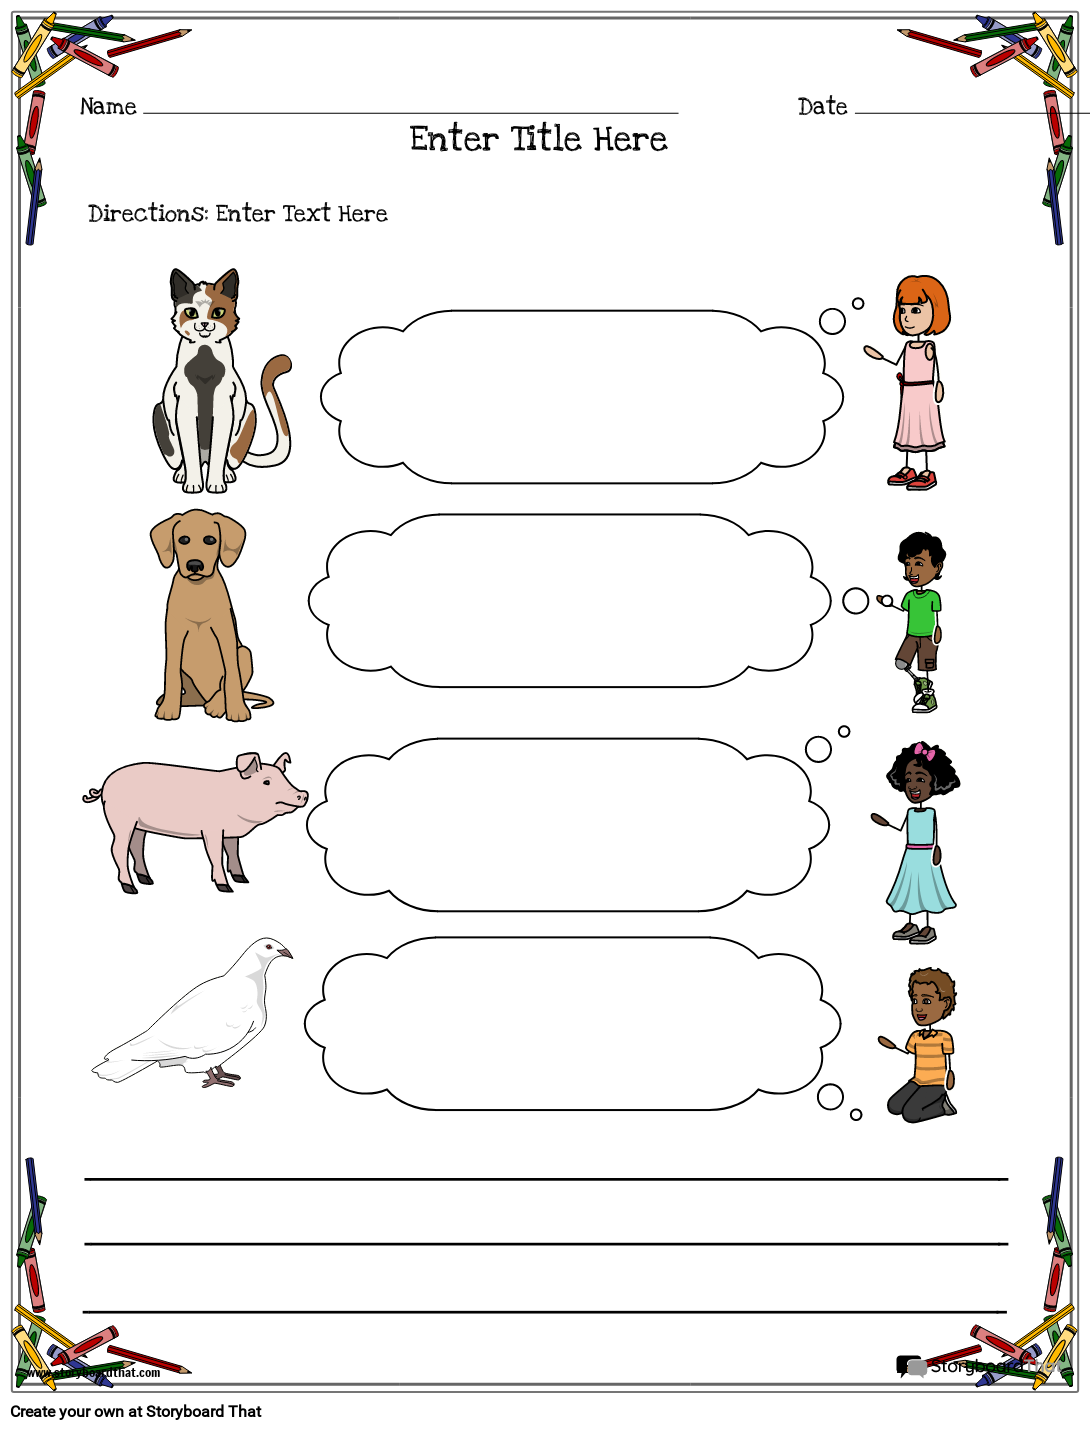 Characters and Animals Based Long Composition Worksheet